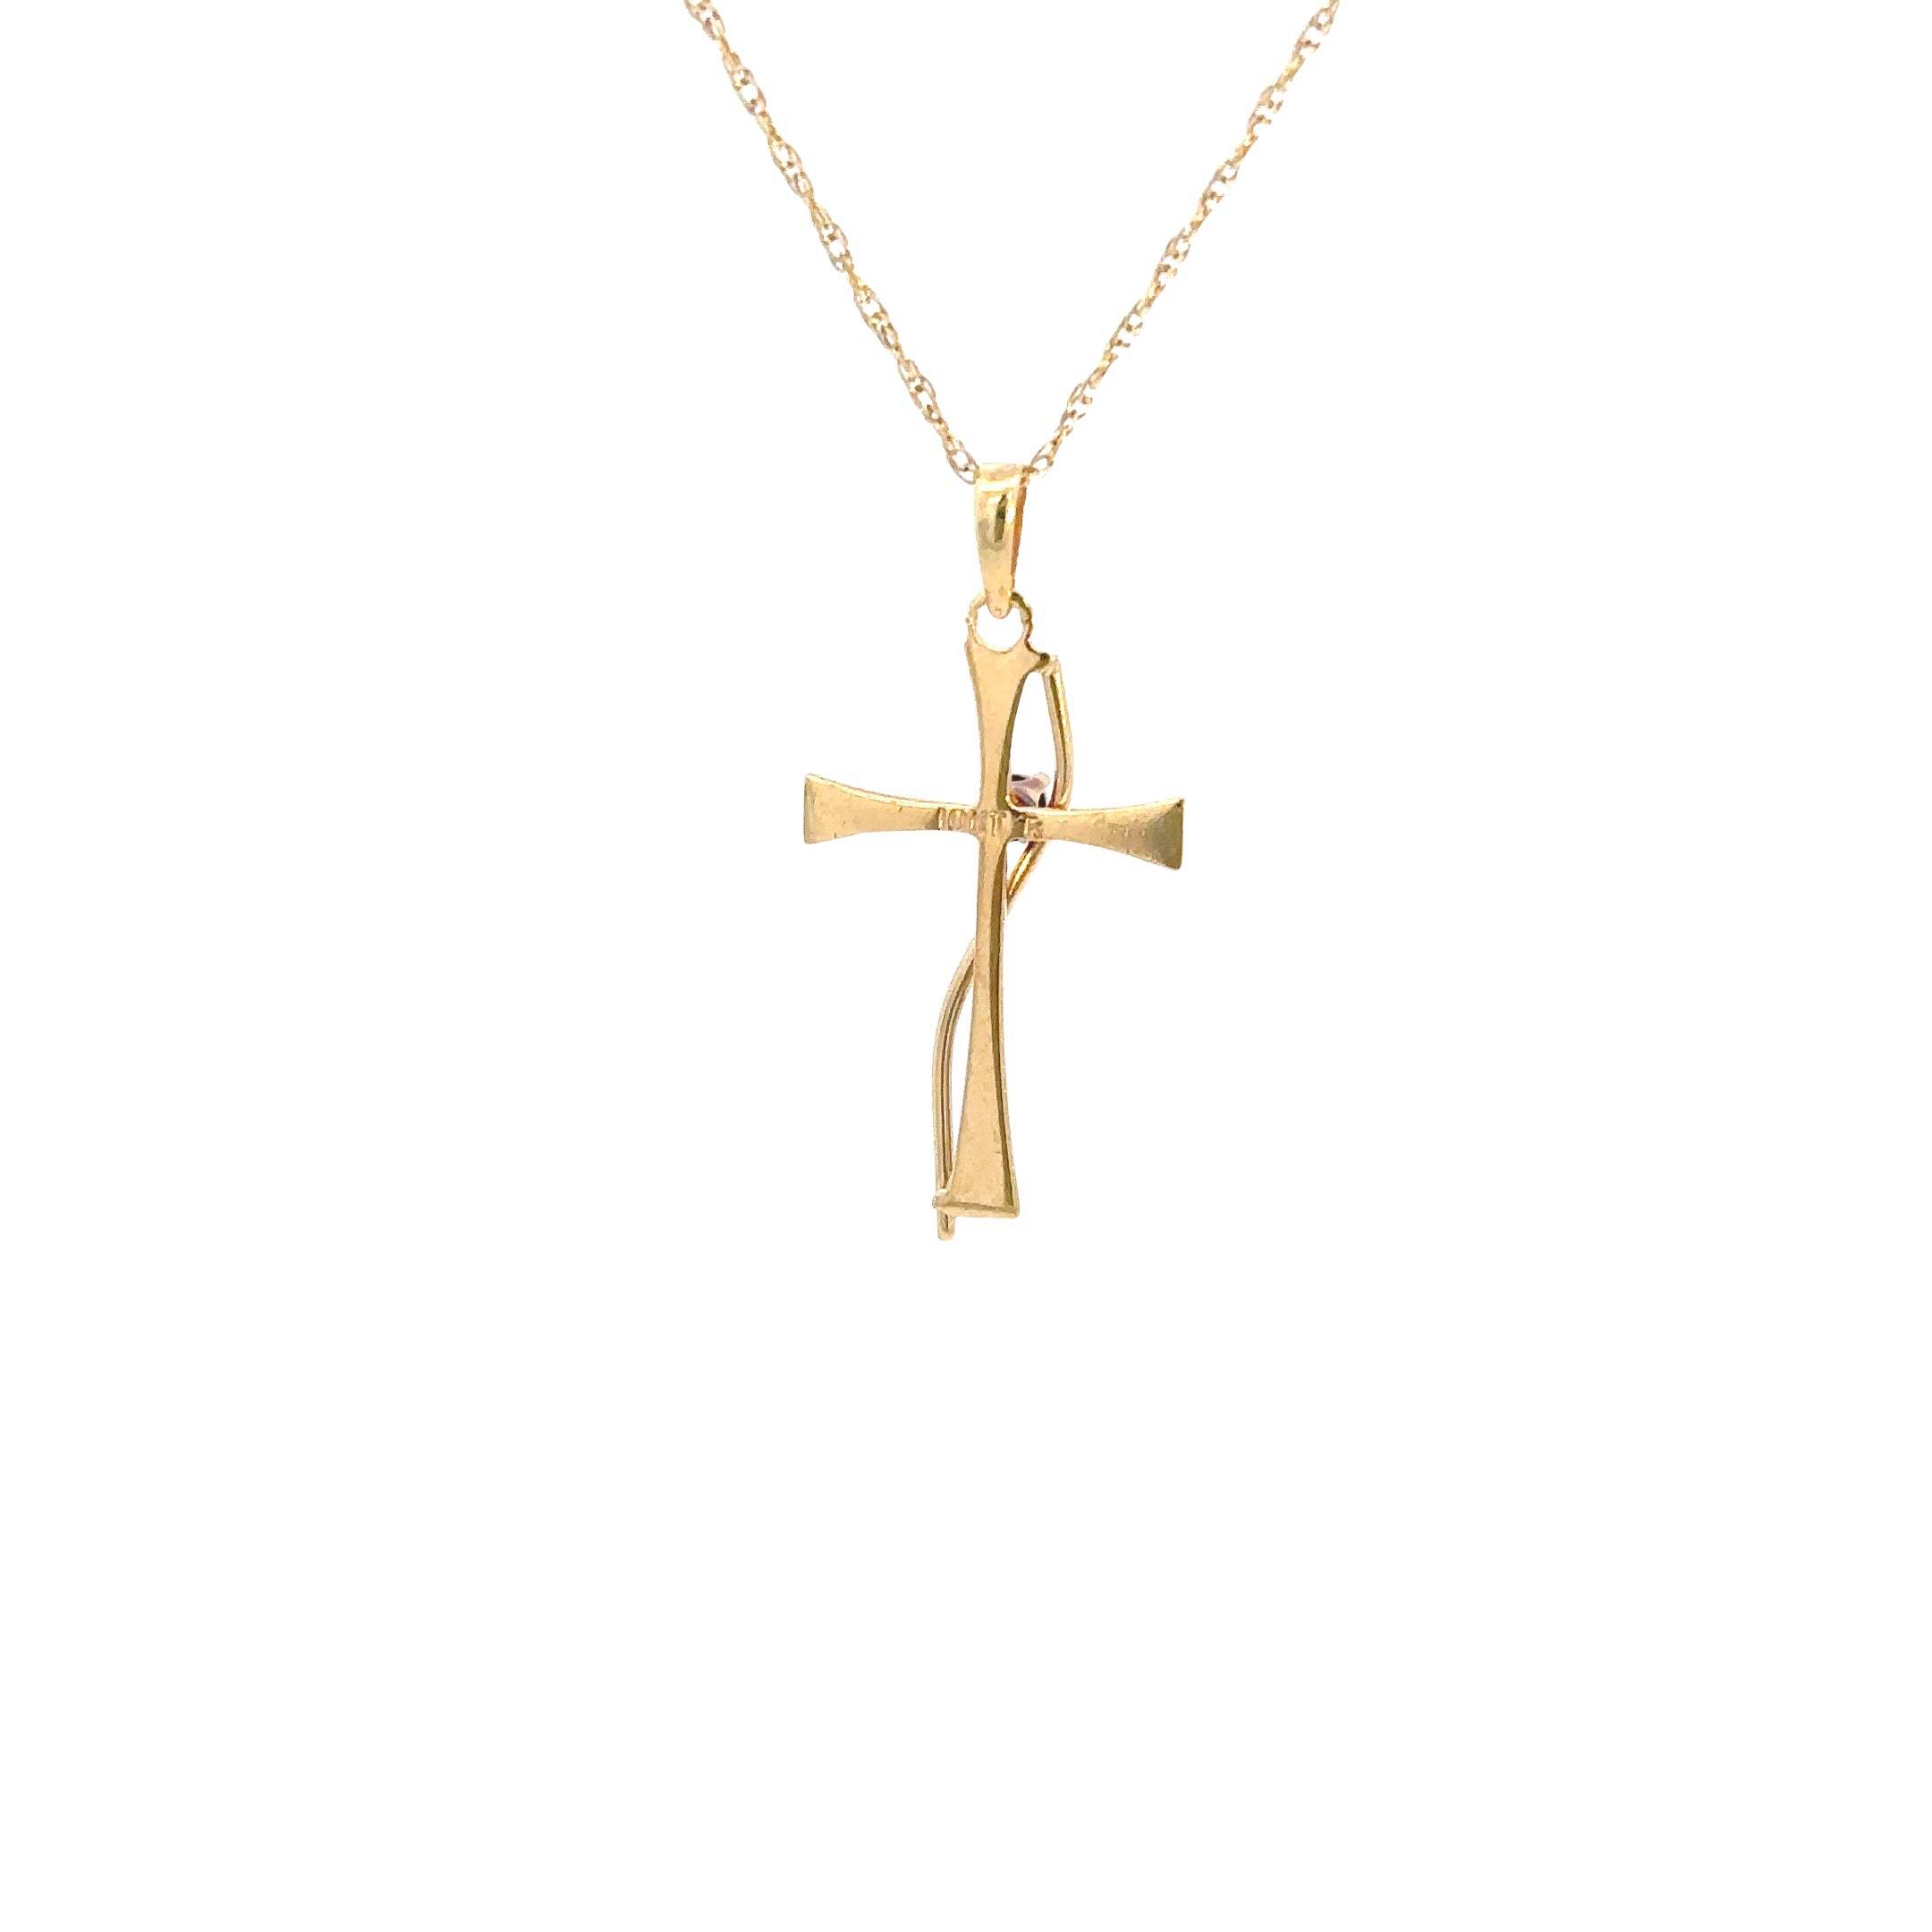 Estate Collection: 10K Yellow Gold Cross with Diamond Accent Pendant Necklace